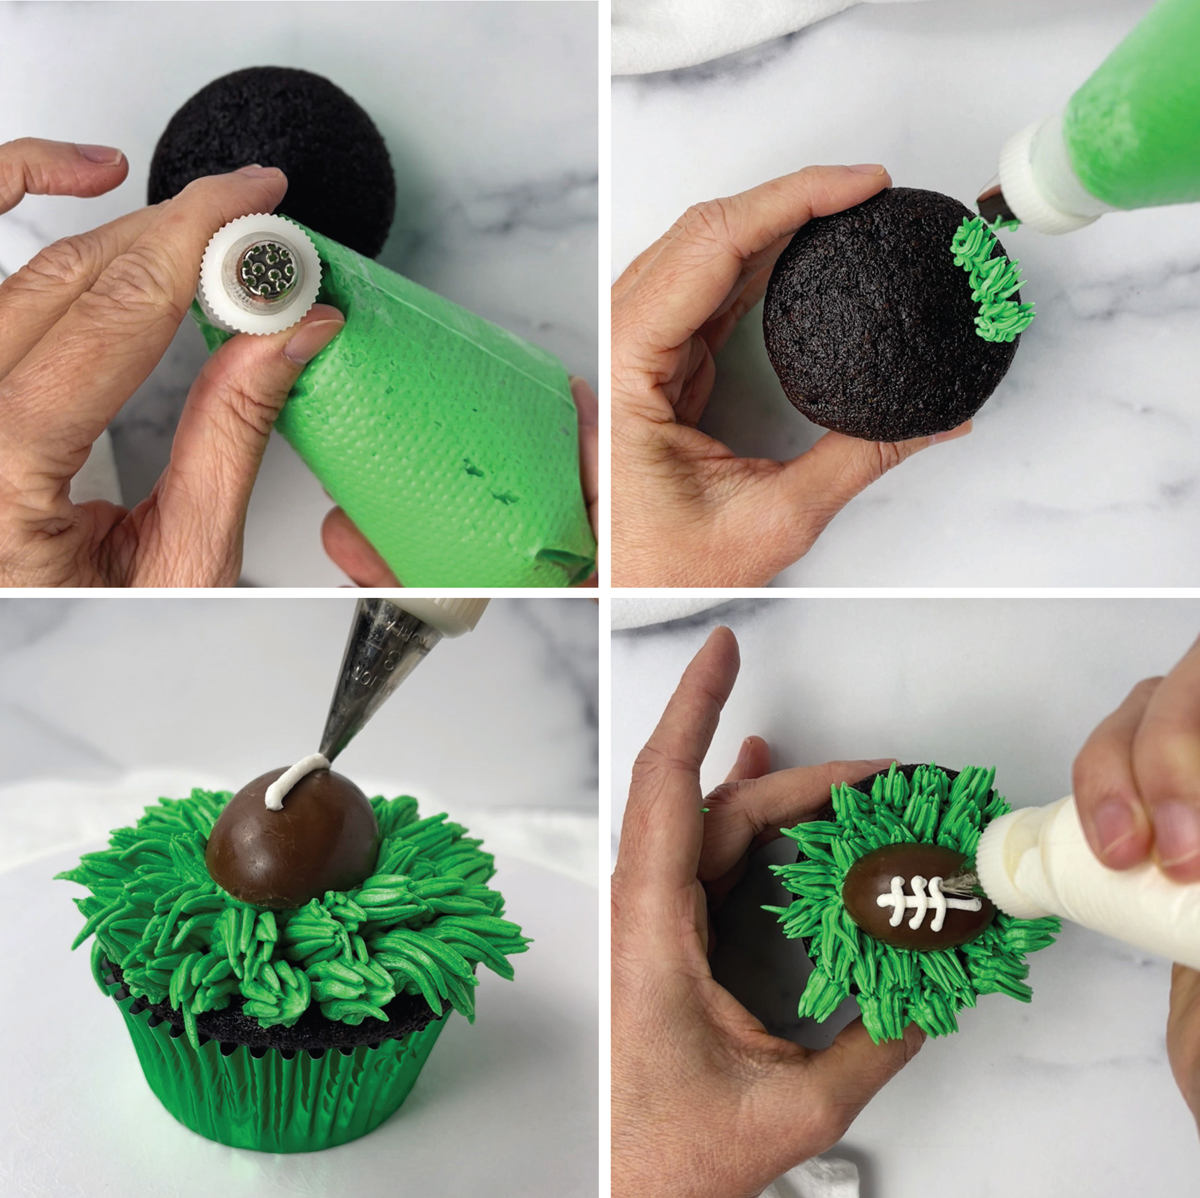 Steps showing how to make football themed cupcakes.